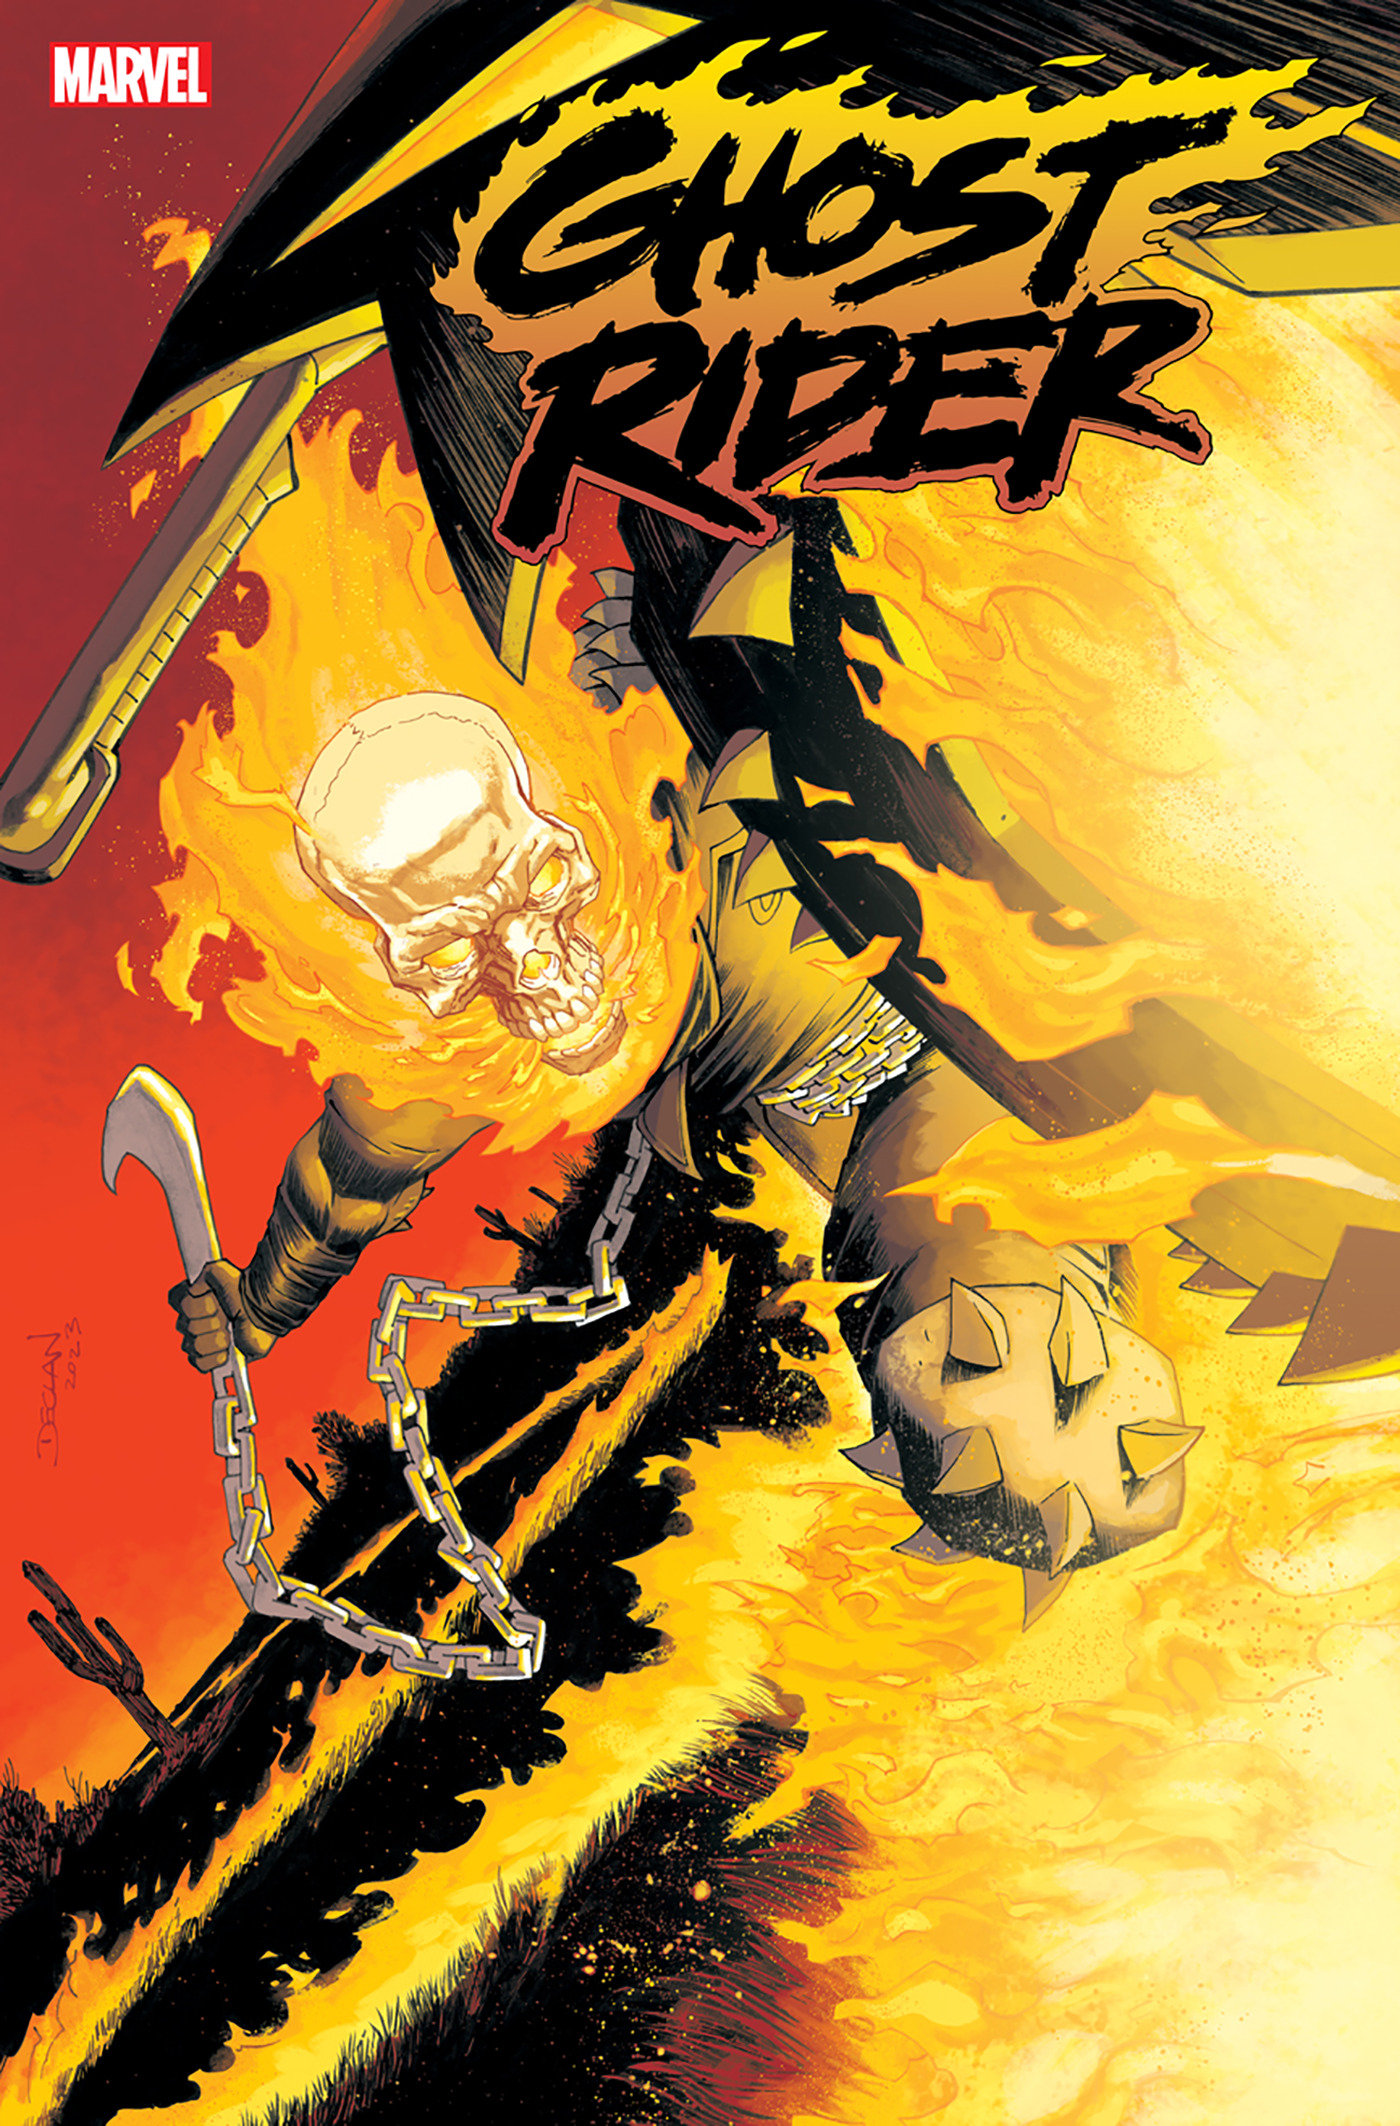 Ghost Rider #18 Declan Shalvey 1 for 25 Incentive